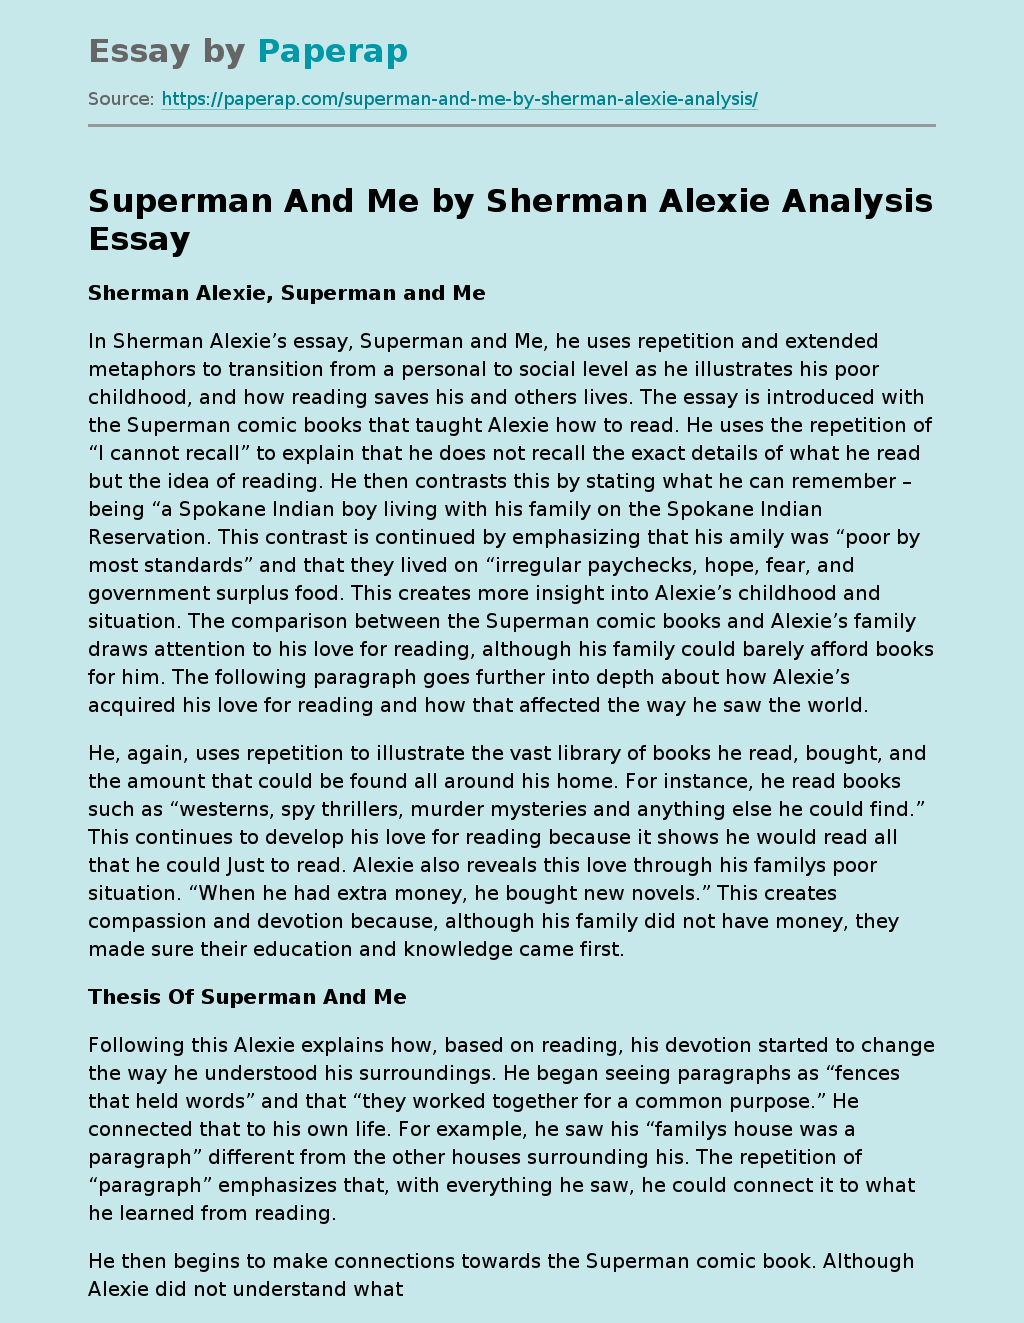 what is the thesis of superman and me